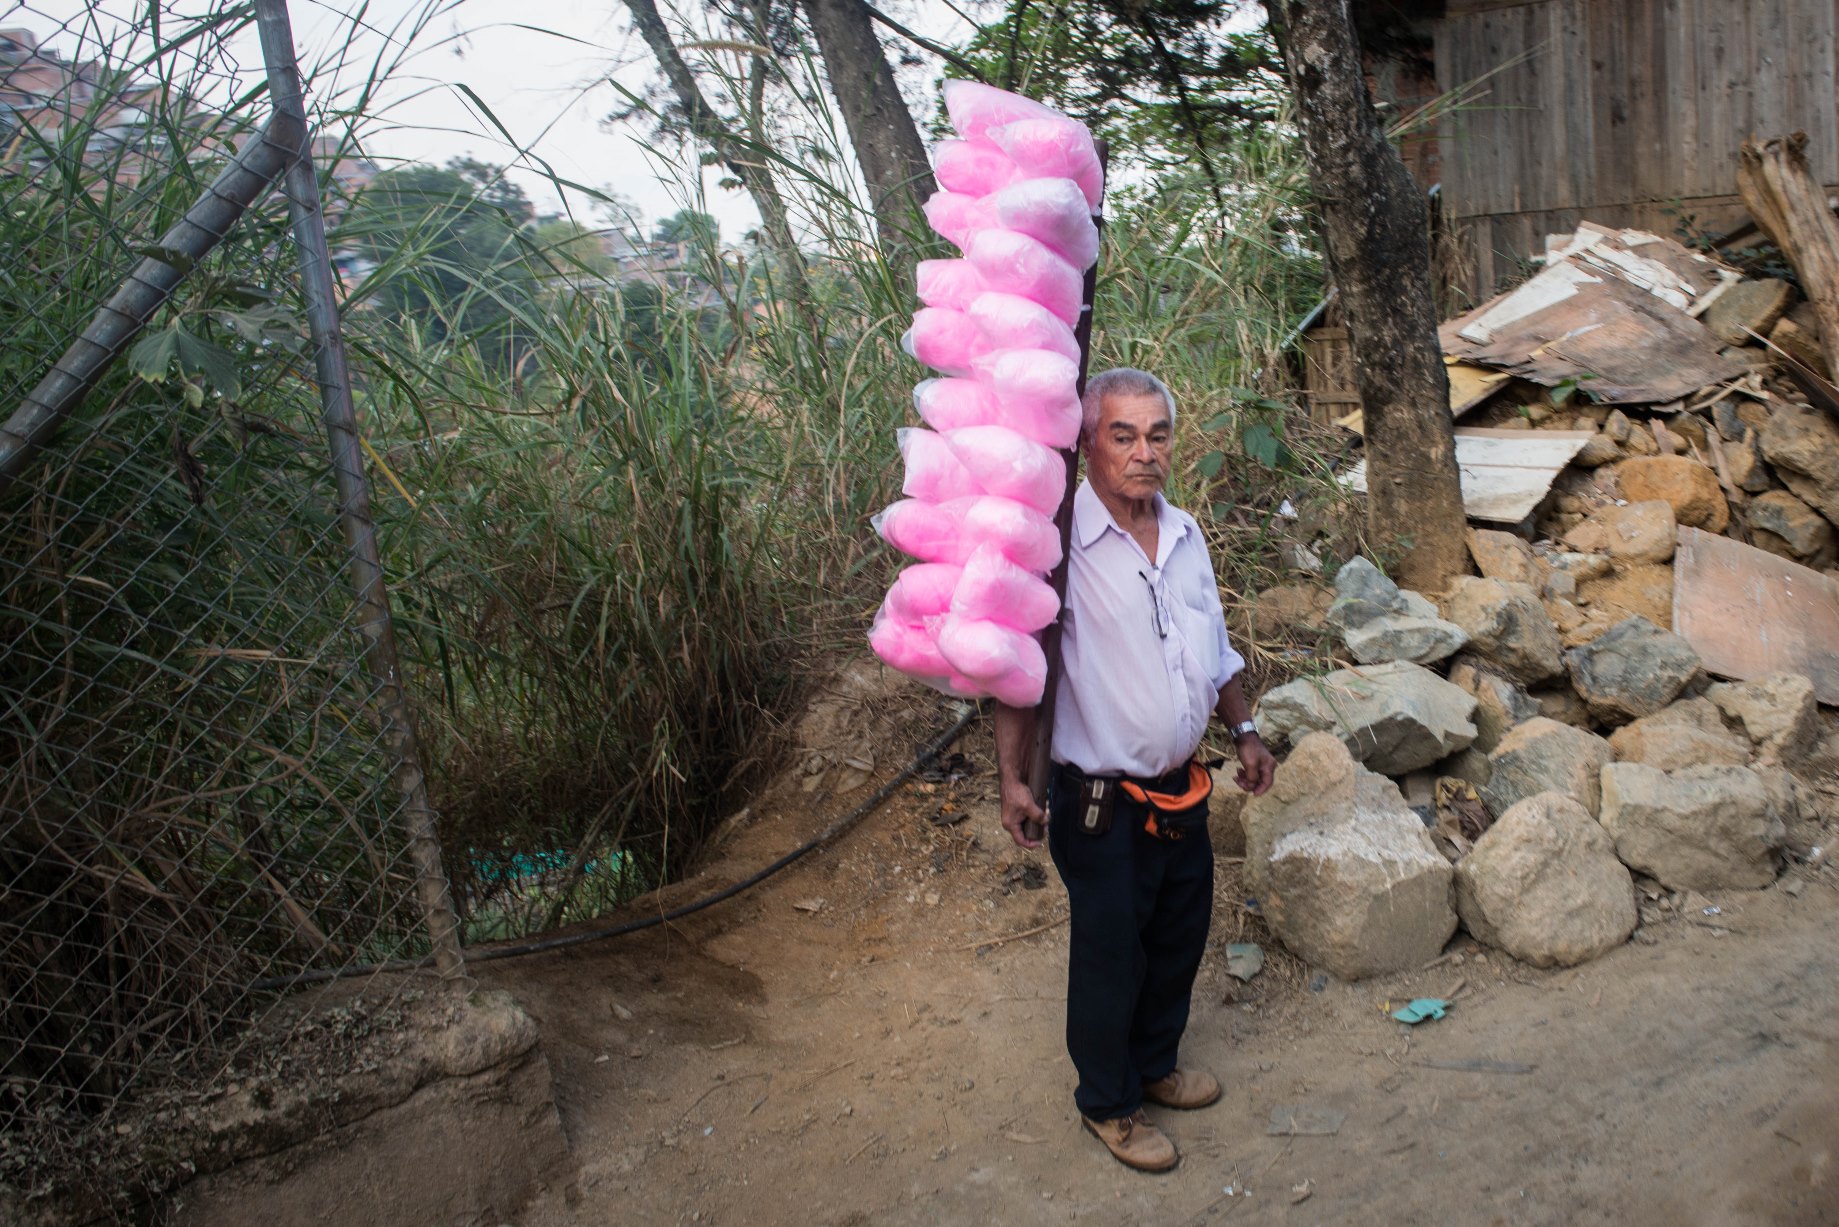 In the photograph, a man sells cotton candy on the roadside. Unemployment is a severe impediment to the community's development and well being. The local economy of Granizal remains in its infancy. Job markets in Bello or Medellin remain mostly inaccessible due to high transportation cost and limited access to educational and vocational training. The highest education attained by nearly half the population of Altos de Oriente is primary school with only 29% of the population attaining secondary education. Only a quarter of the community's working population engages in income generating activities, the majority of which is informal. Thanks to University of Antioquia's support, many community members are now receiving access to educational courses and programs. The younger generation of community members, however, are working hard to break these economic barriers. The availability of schools and relative peace have allowed those born and raised in Altos de Oriente to access schooling regularly. A number of the youth are the first in their families to attend college.